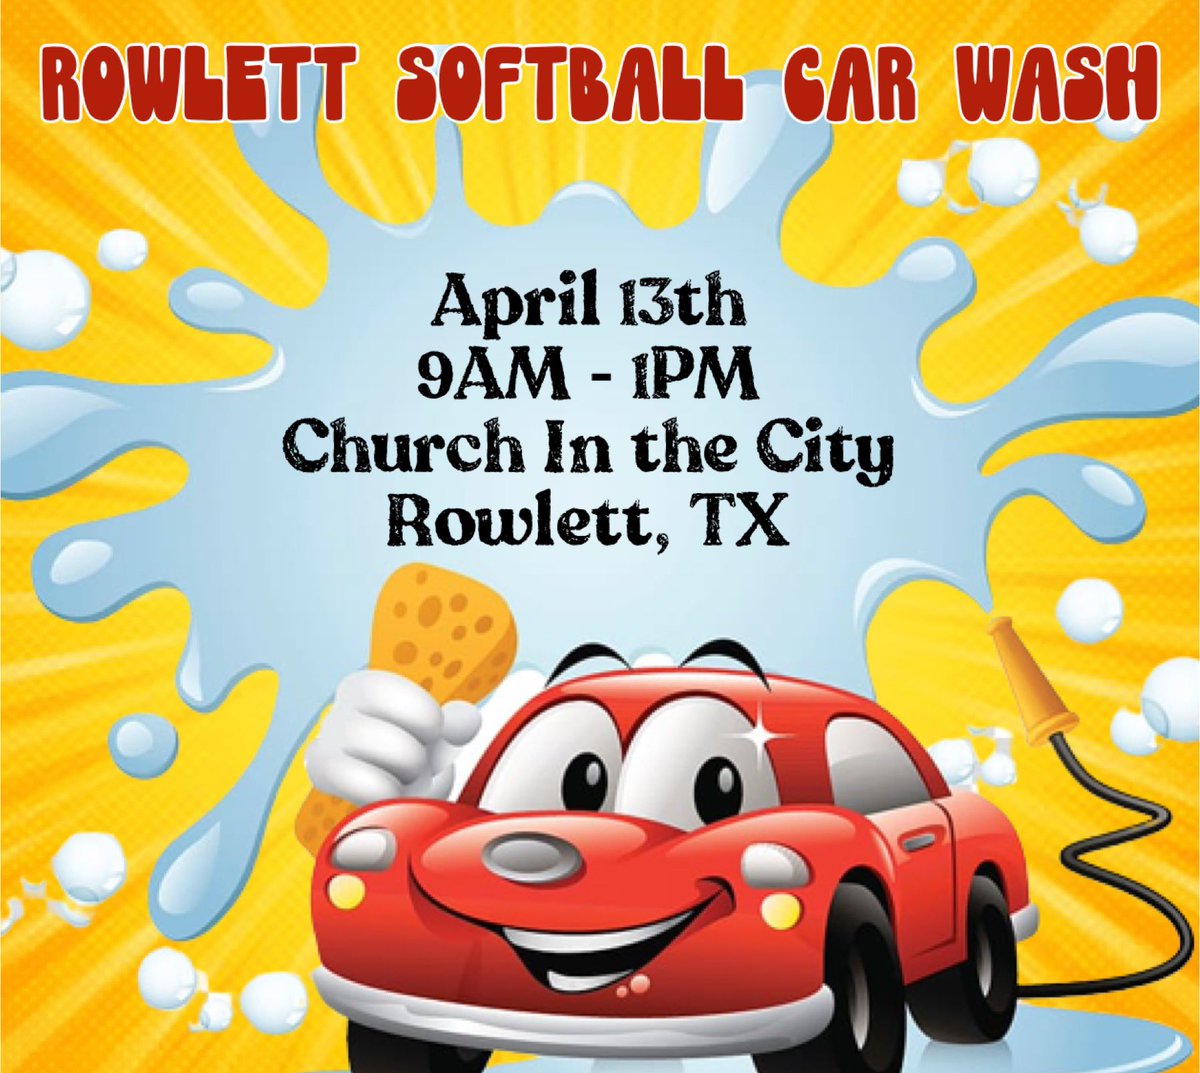 Hey softball fans!! Save those after rain car washes until Saturday and come see us! We will get you all shined up and back on the road in no time. ☀️🚗💦 Any and all donations will be accepted. Cash, Zelle, CashApp, Venmo or PayPal will be accepted. Thank you for your support!